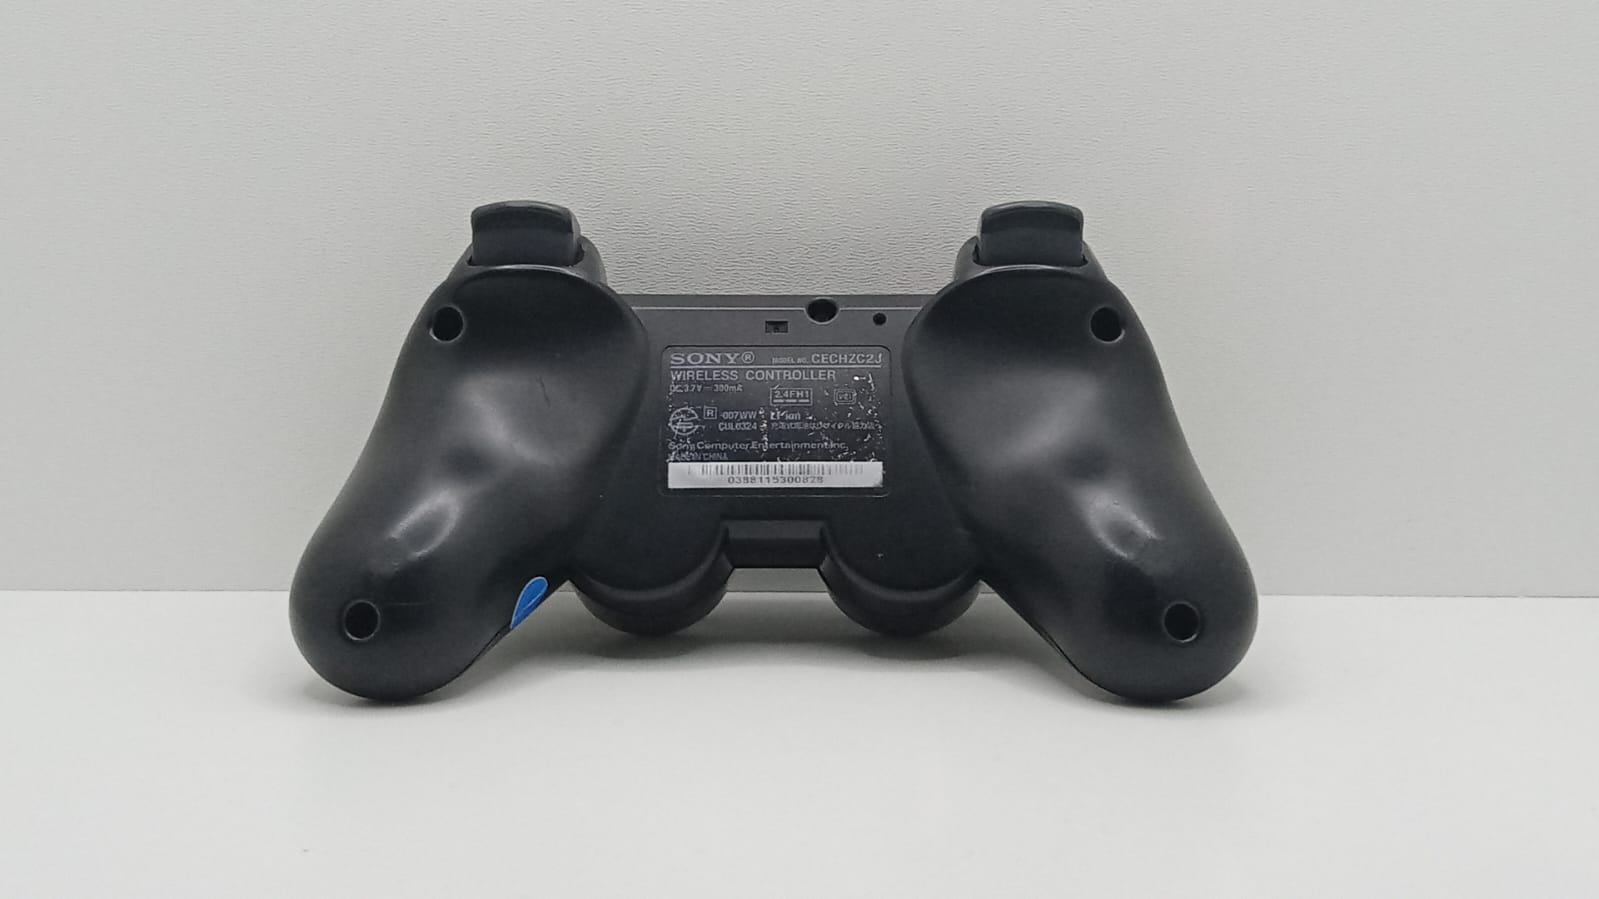 Controller wireless Dualshock 3 PlayStation 3 PS3 - NEGRU - SONY® - curatat si reconditionat